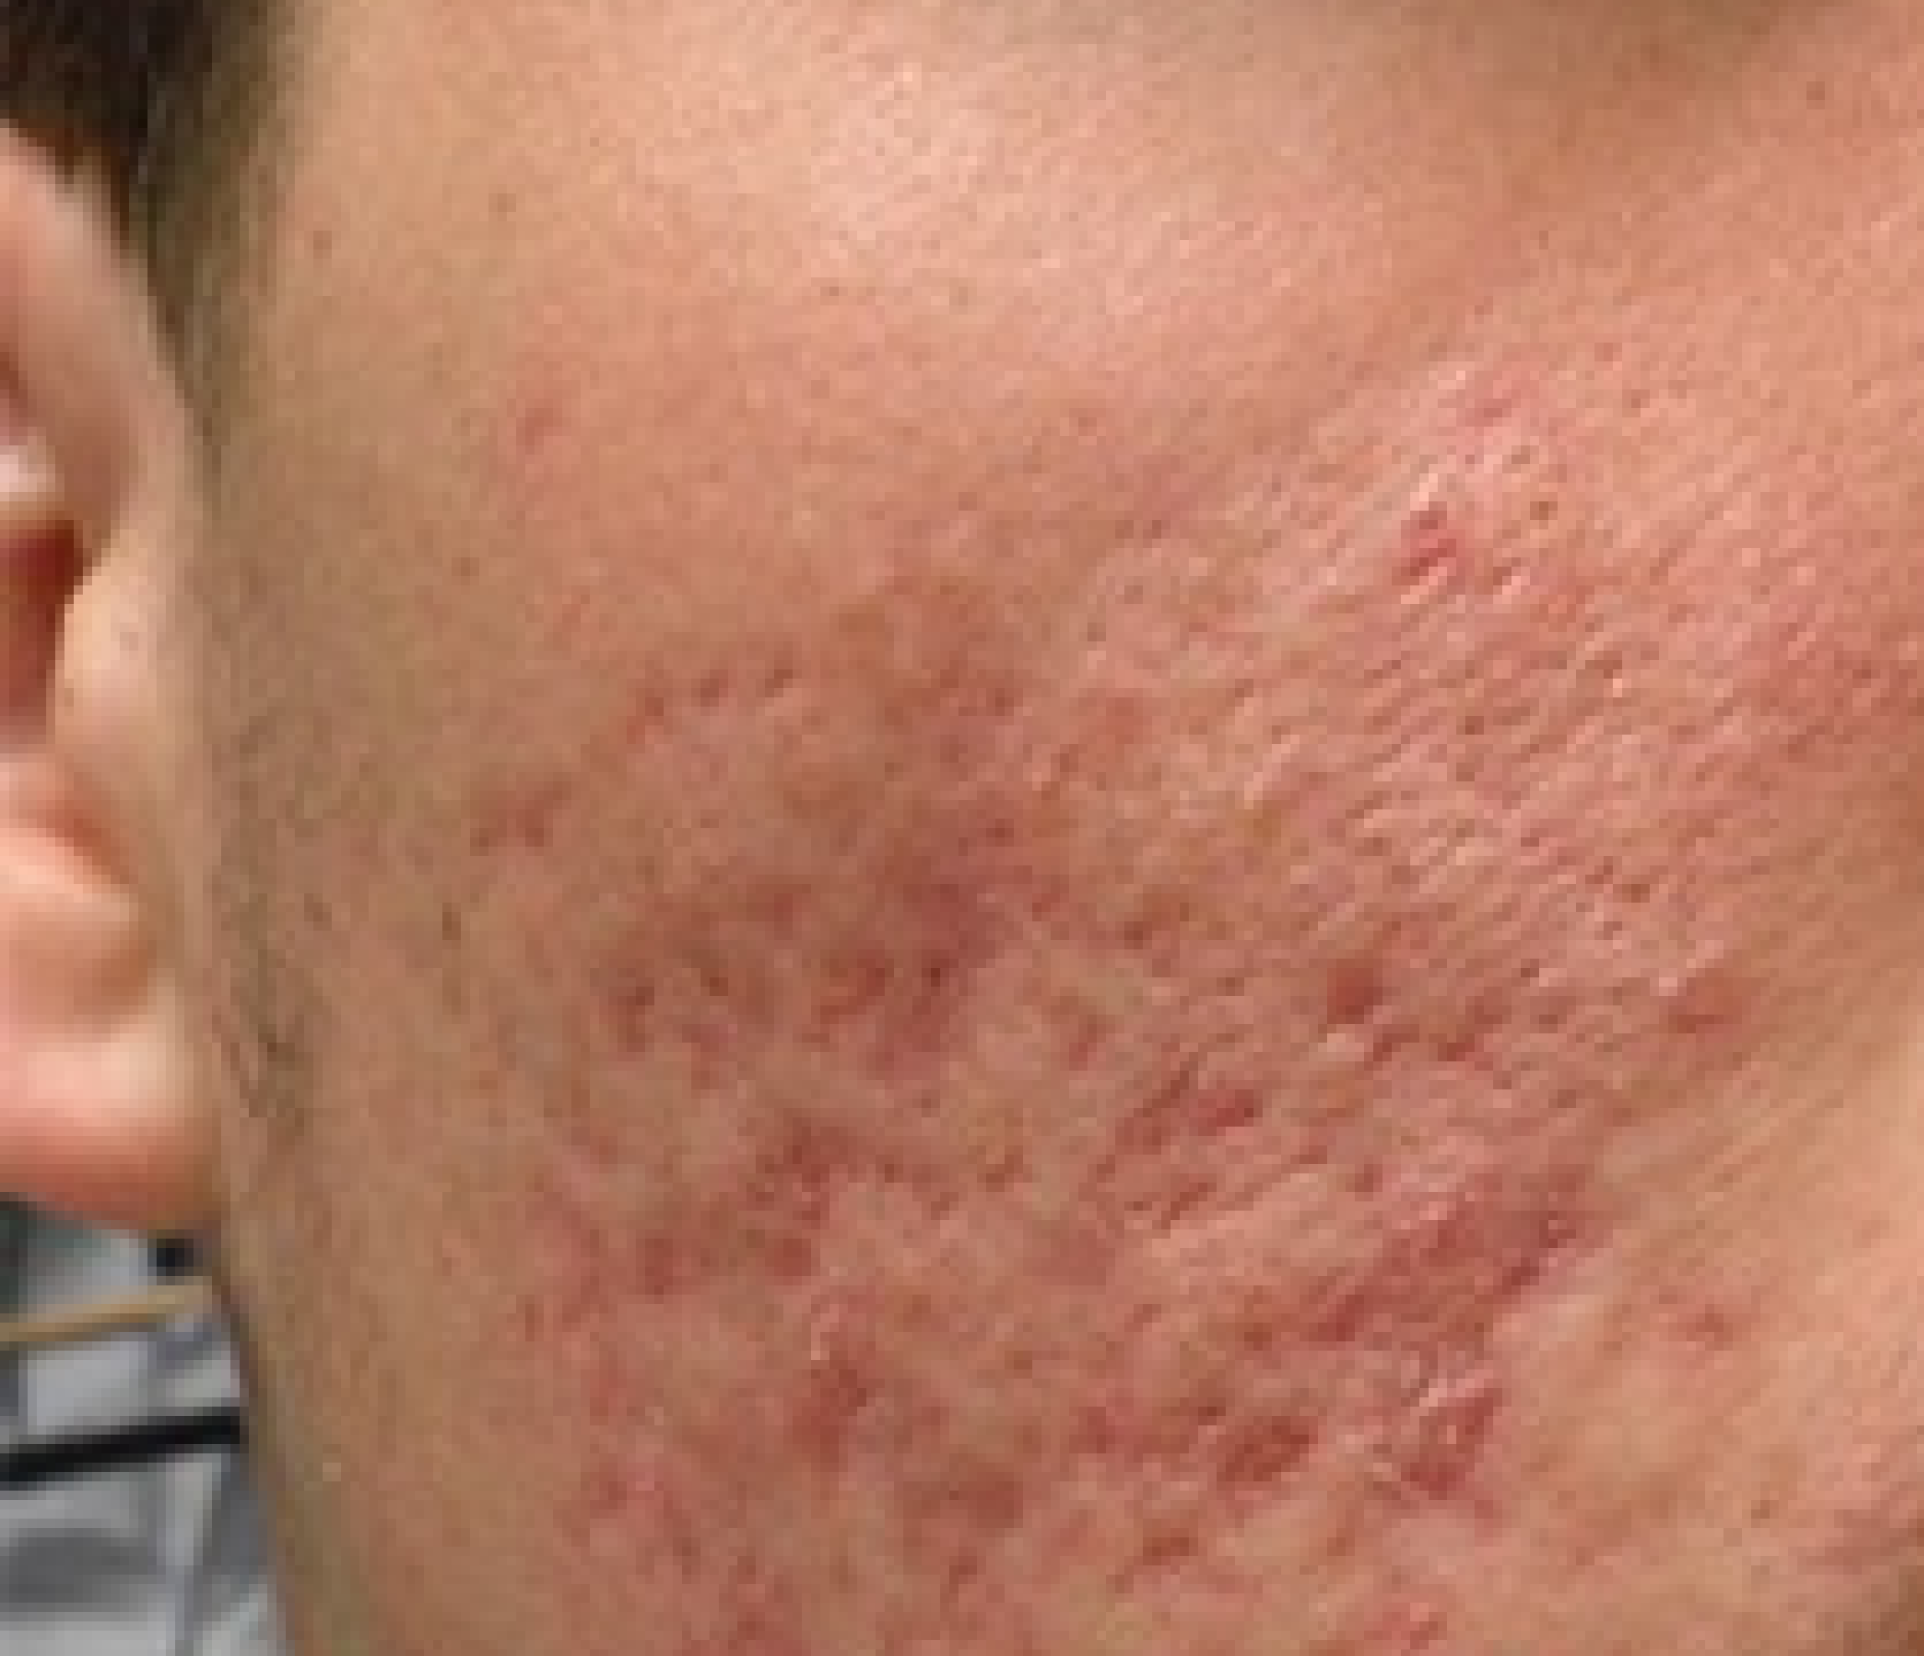 treatment of acne scars